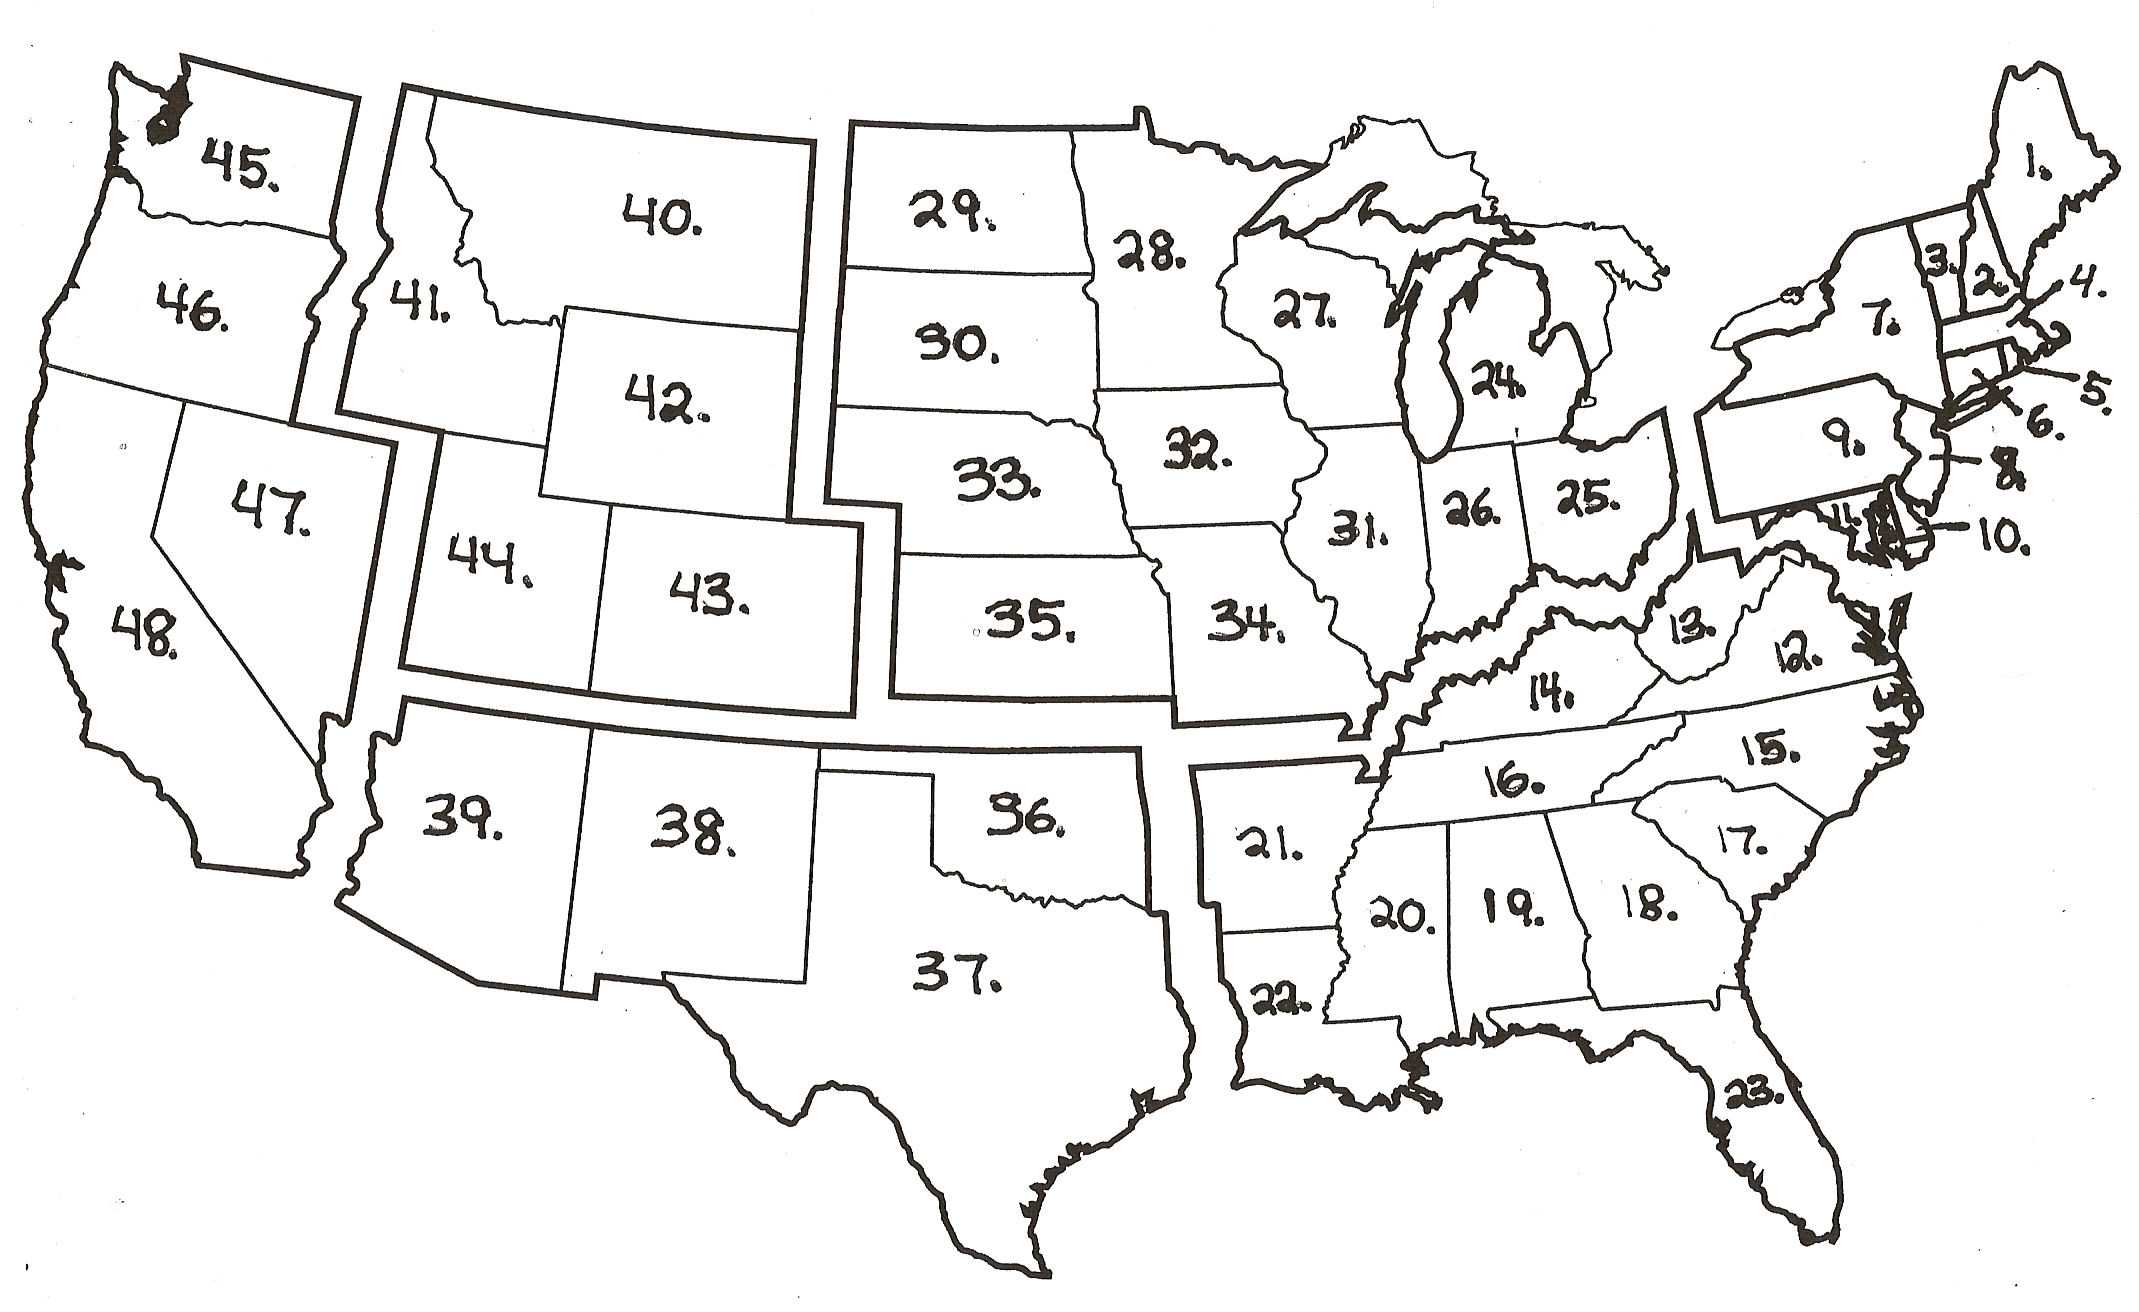 file-map-of-usa-with-state-names-ka-png-wikimedia-commons